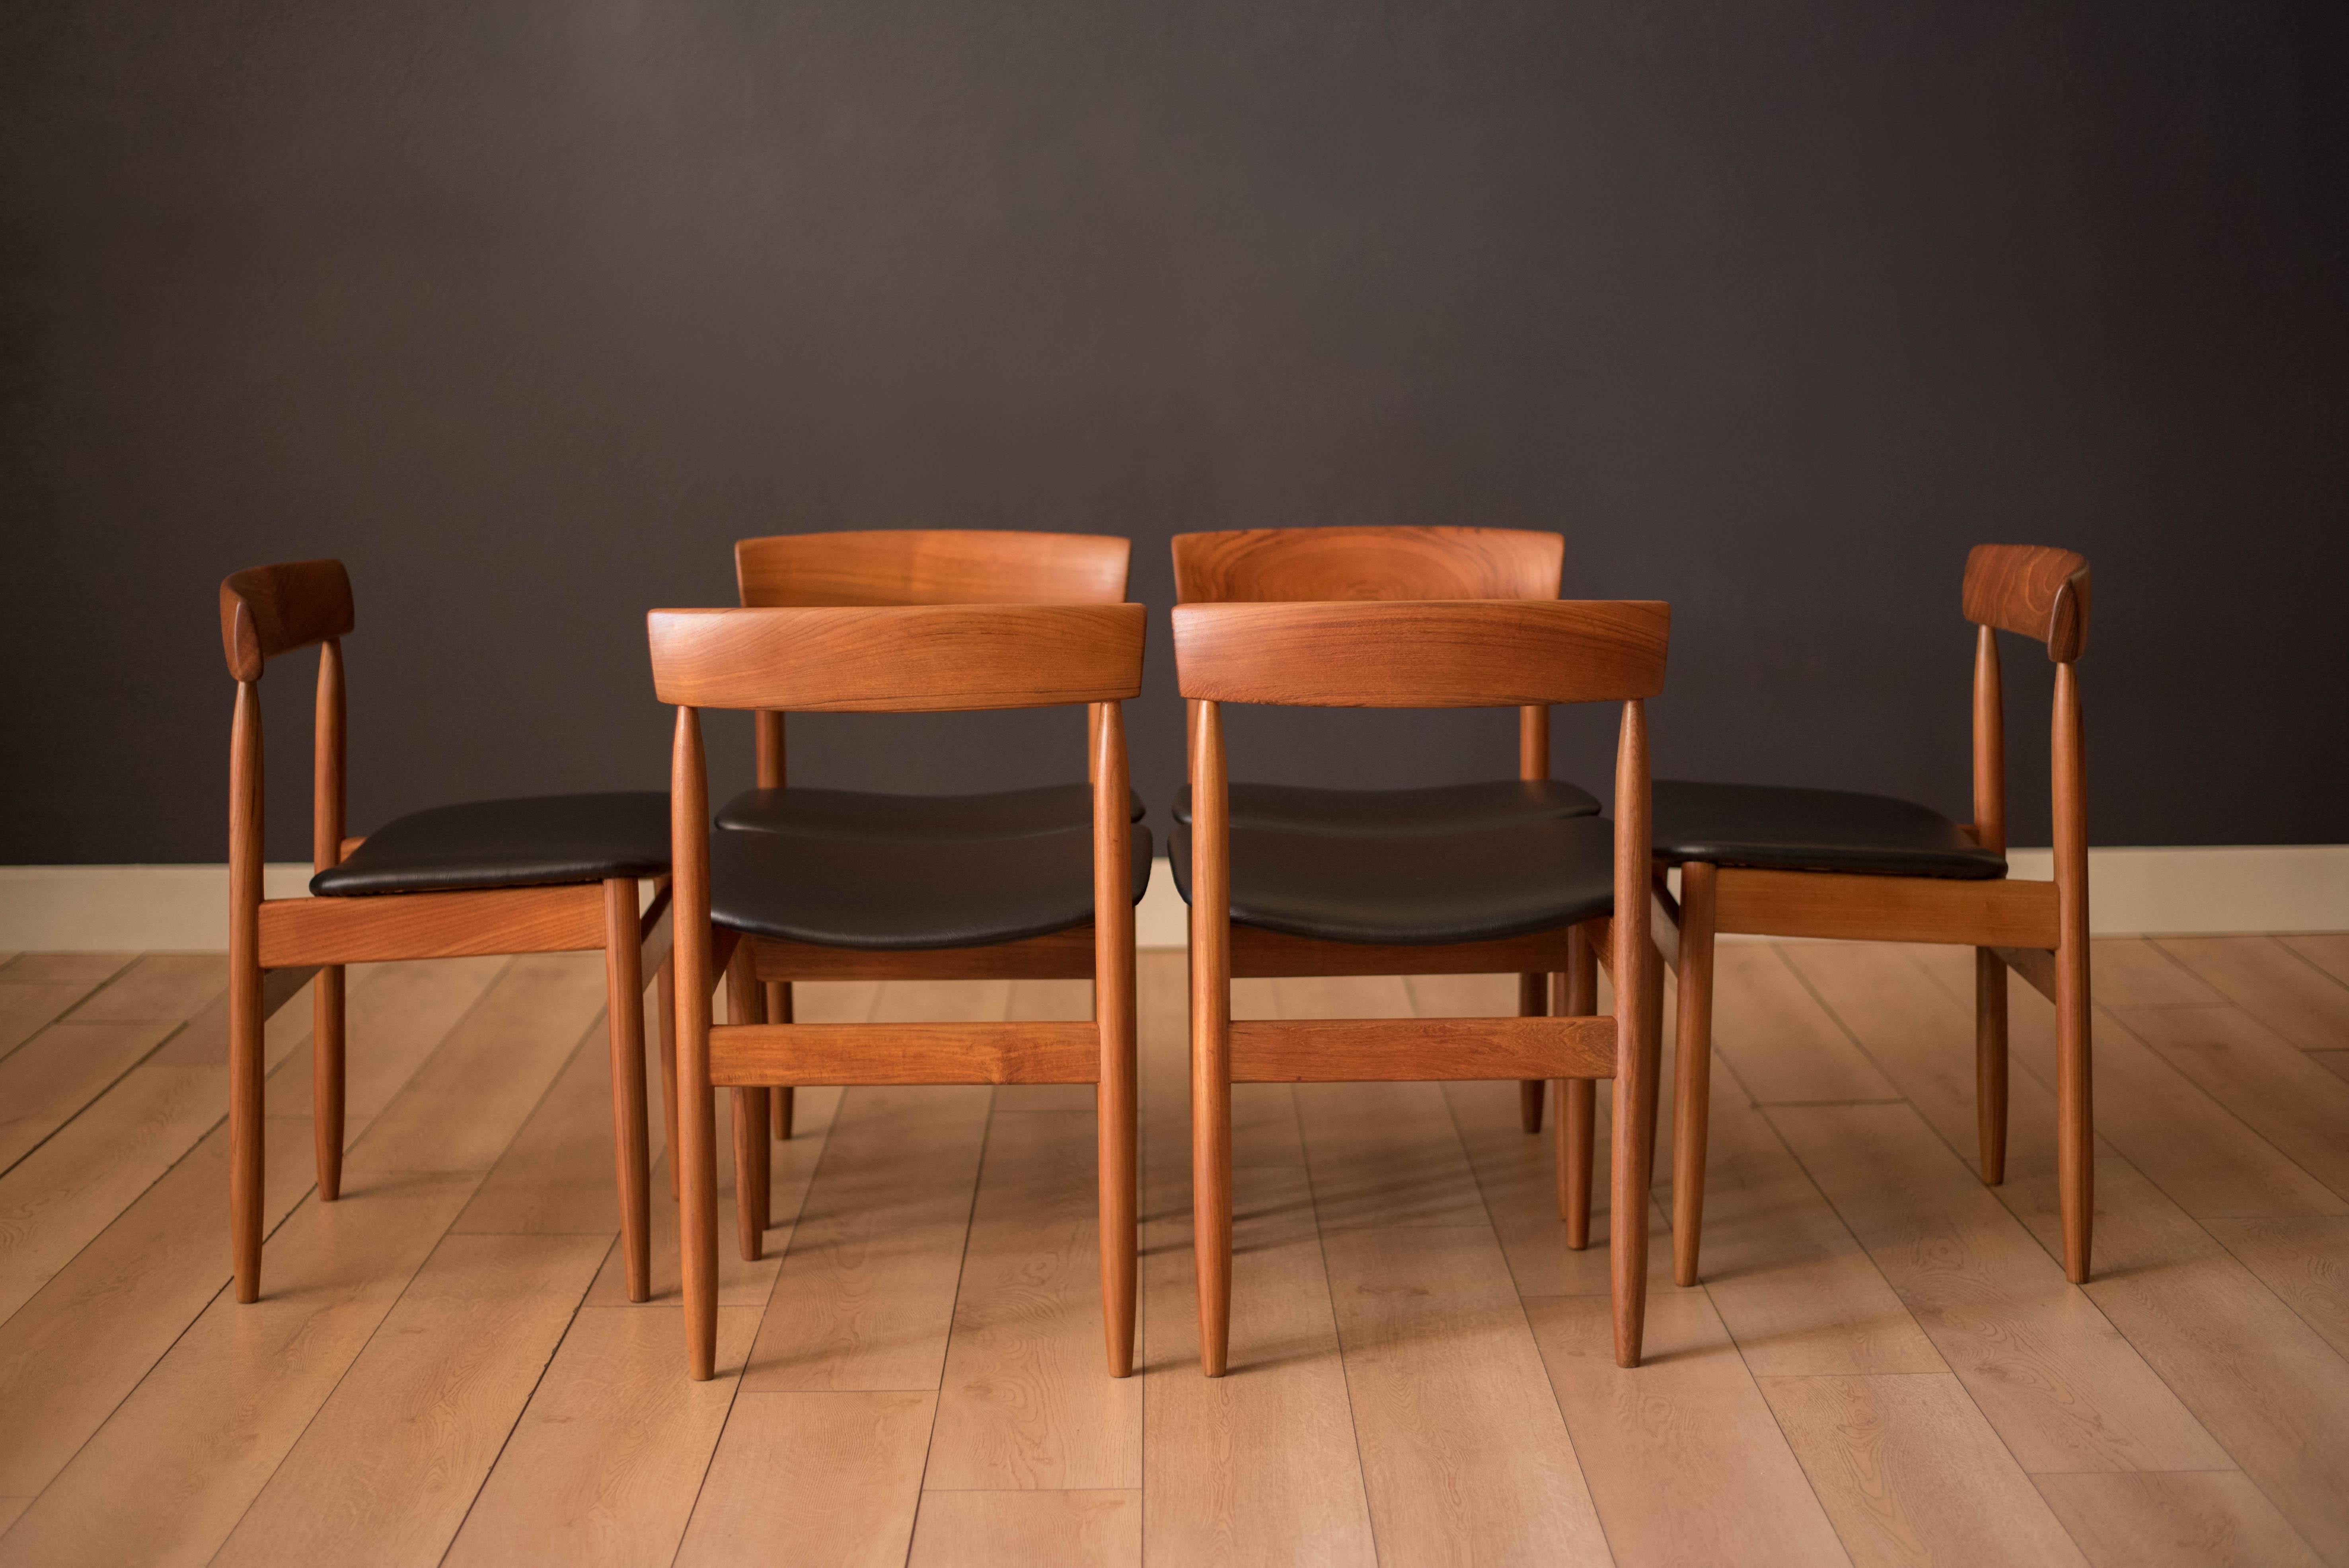 Mid century modern dining chairs in teak designed by Arne Hovmand-Olsen for Mogens Kold, Denmark. Each individual chair is crafted with a curved solid paddle backrest and sculptural supporting legs. This set has been newly reupholstered in black